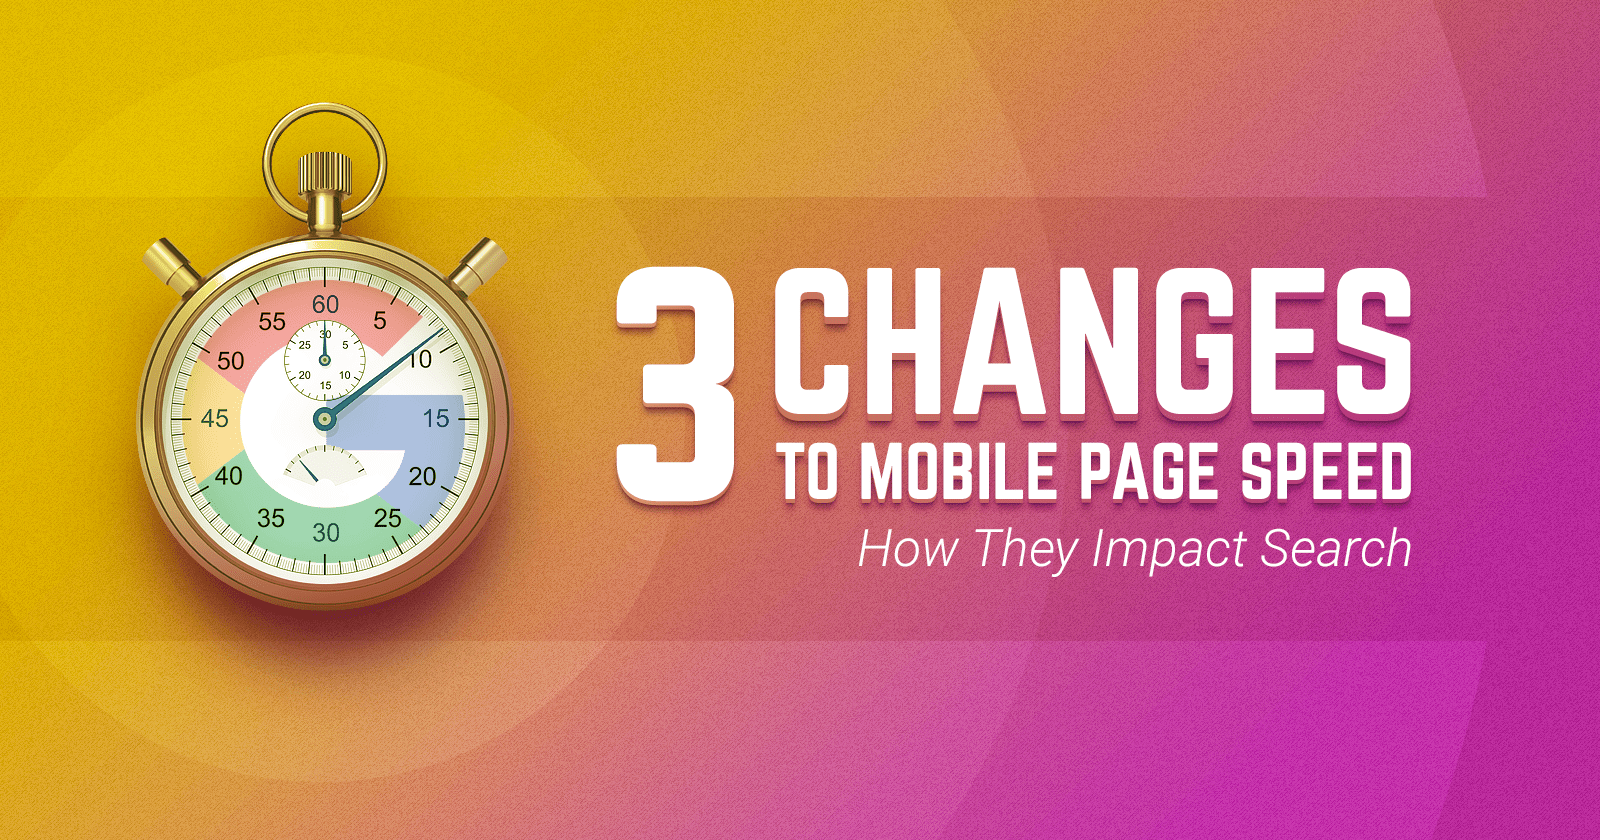 3 Changes to Mobile Page Speed and How They Impact Search